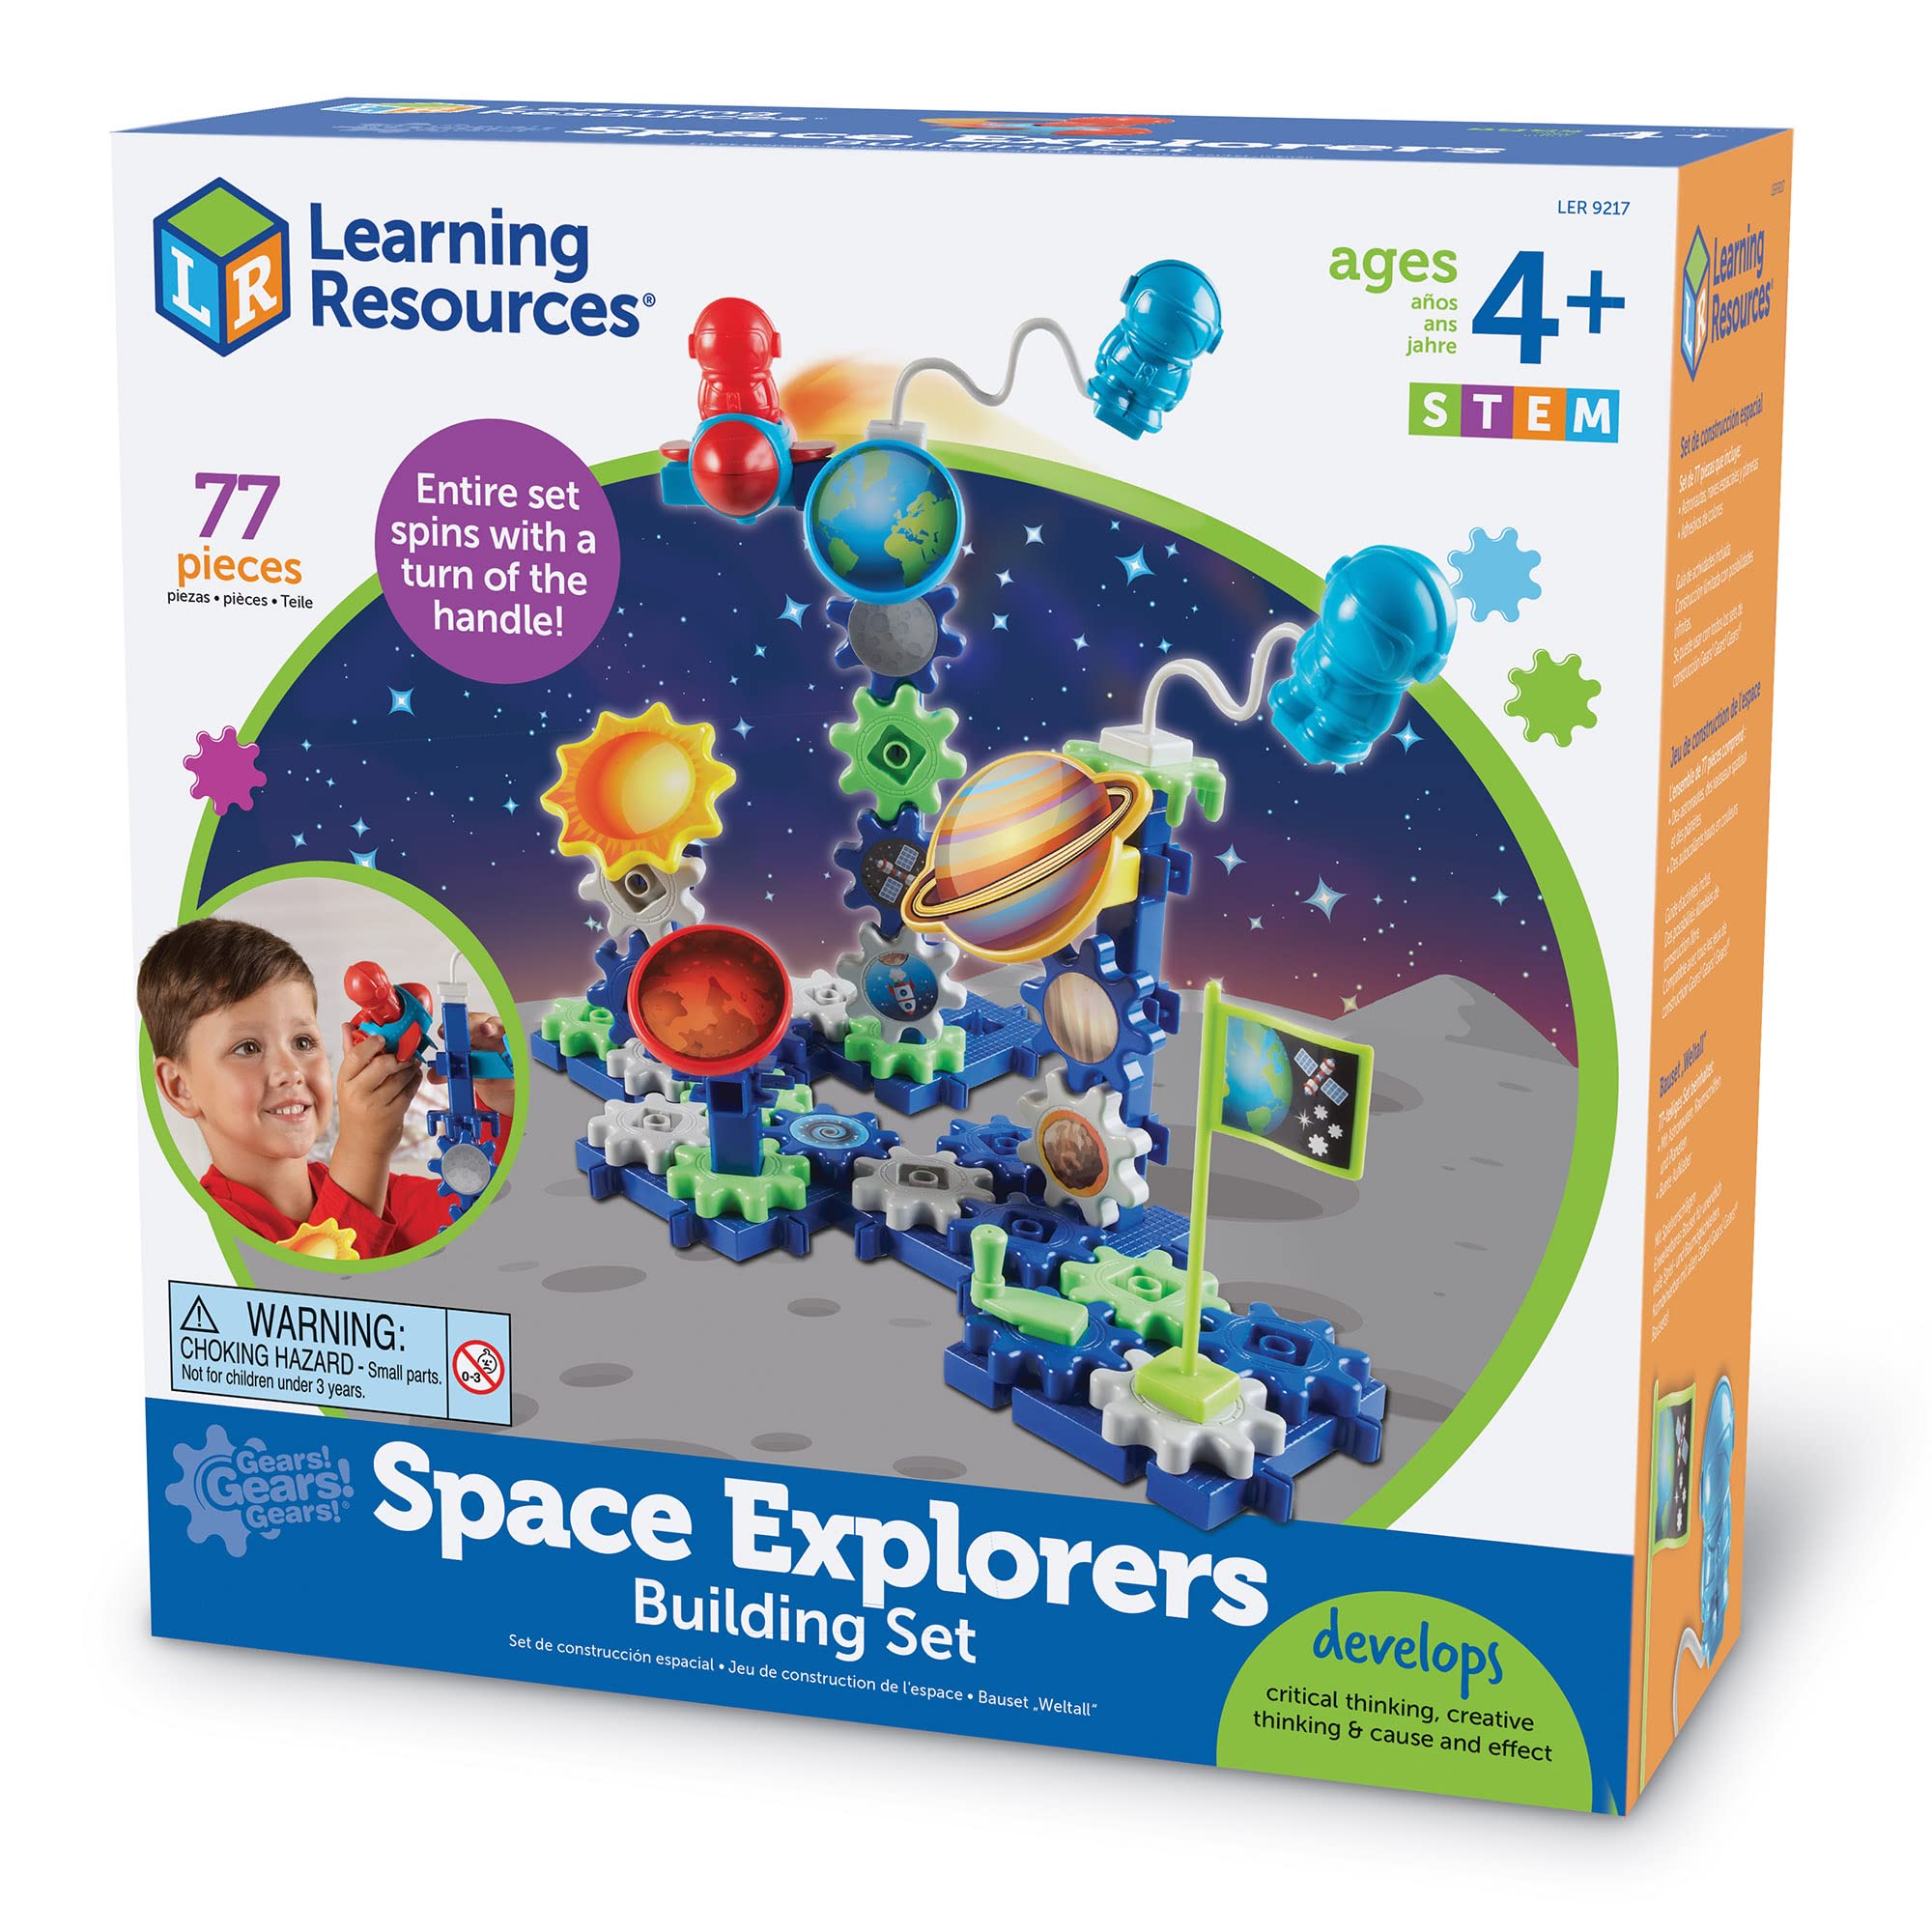 Learning Resources Gears! Gears! Gears! Space Explorers Building Set, 77 Pieces, Ages 4+, Gears & Construction Toy, STEM Toys, Gears for Kids,Back to School Gifts